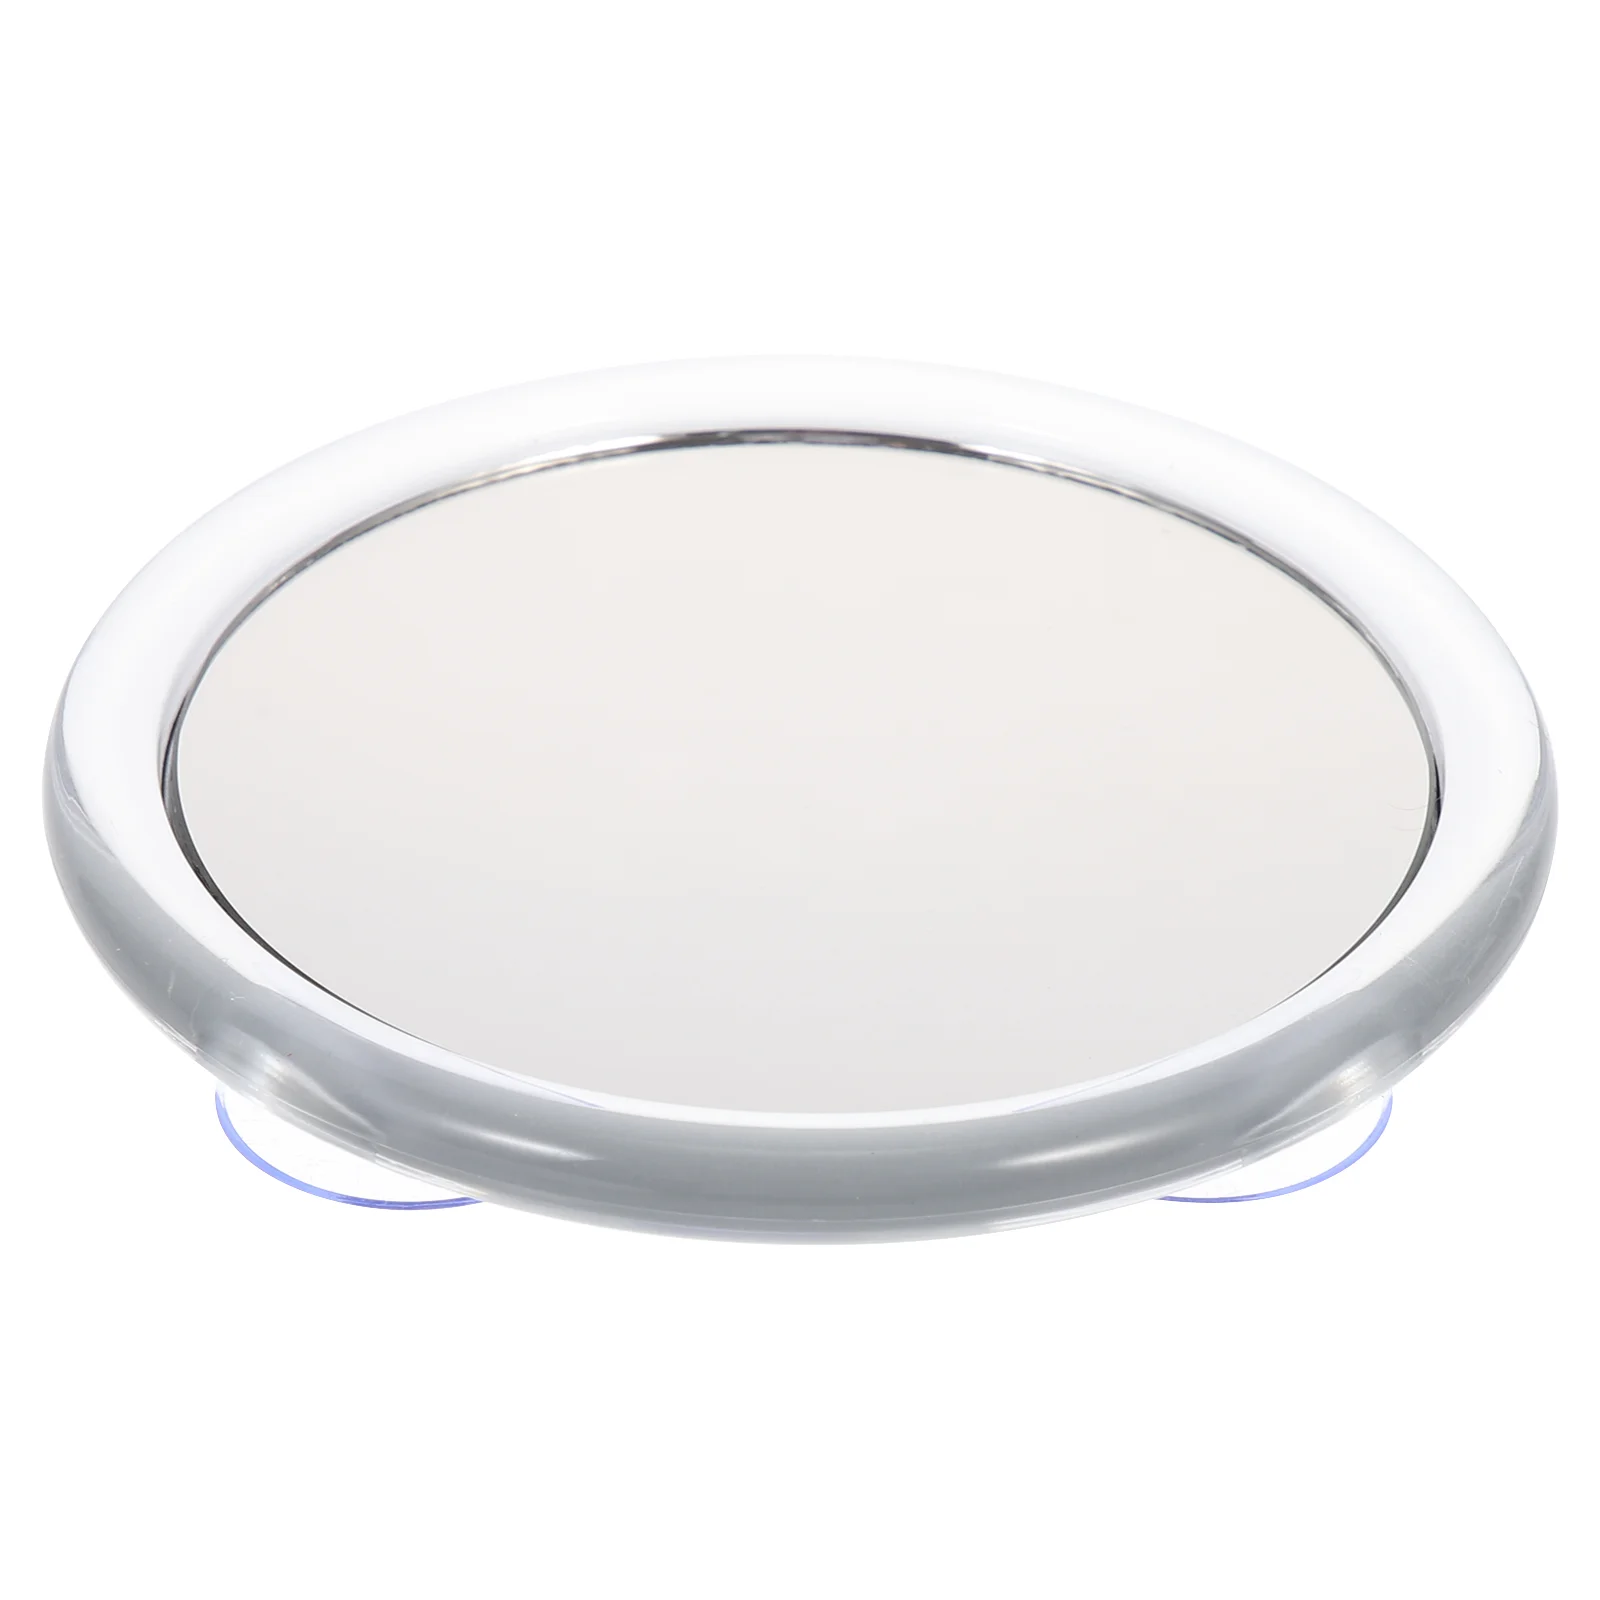 

20X Magnifying Makeup Mirror 10x Magnifying Mirror Round Vanity Mirror Magnification Pocket Mirrors Suction Cup Mirror